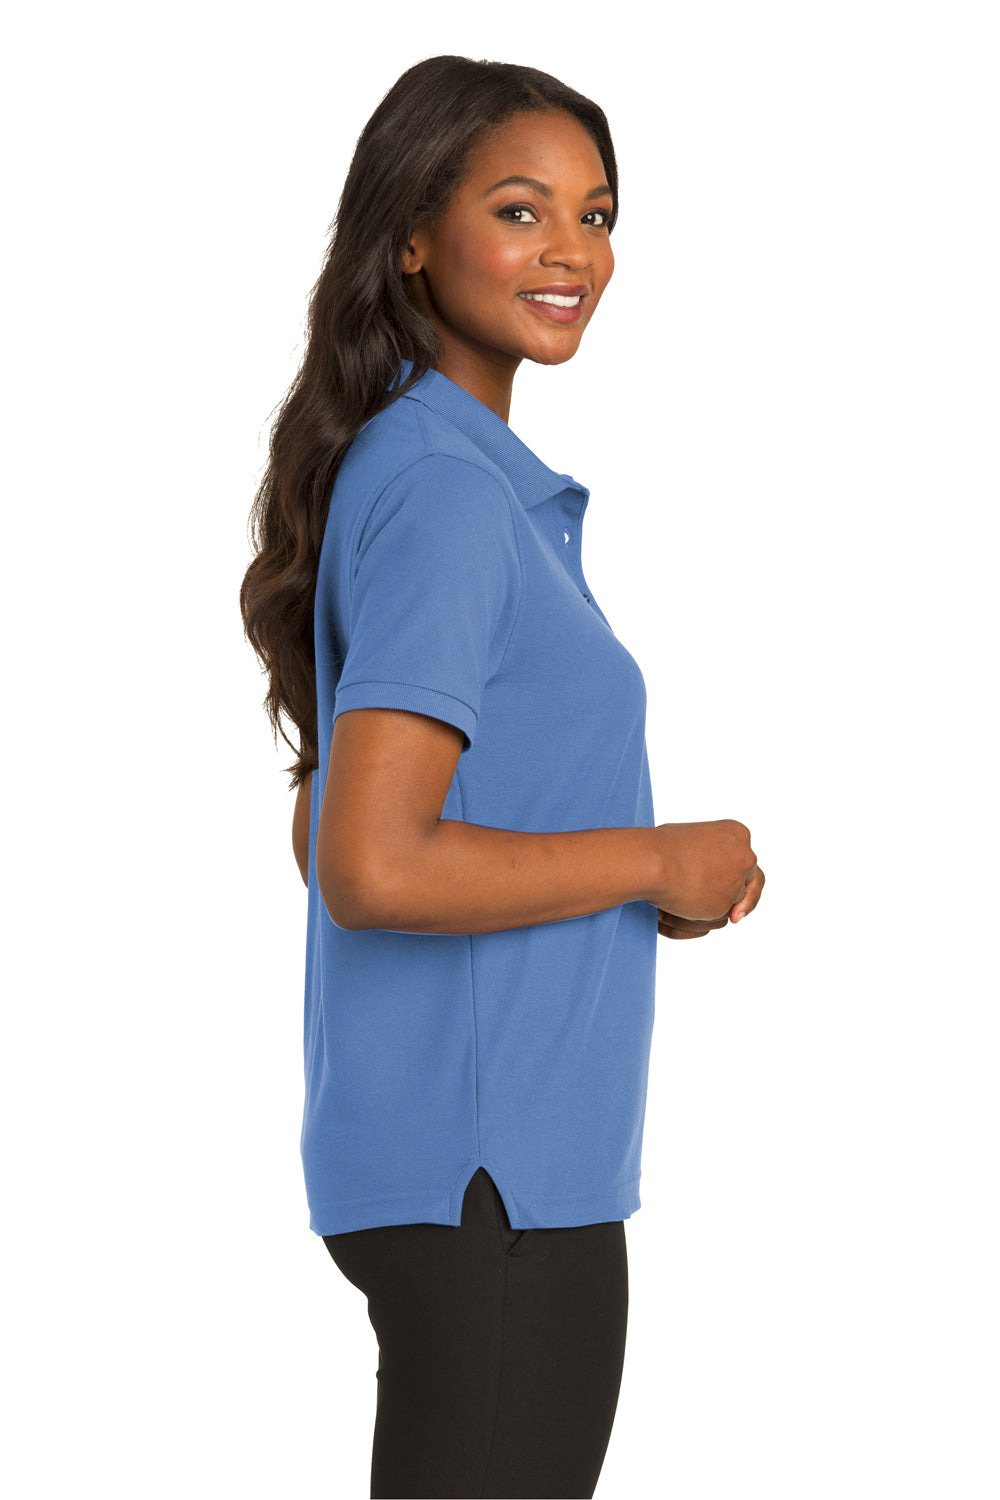 Port Authority L500 Womens Silk Touch Wrinkle Resistant Short Sleeve Polo Shirt Ultramarine Blue Side